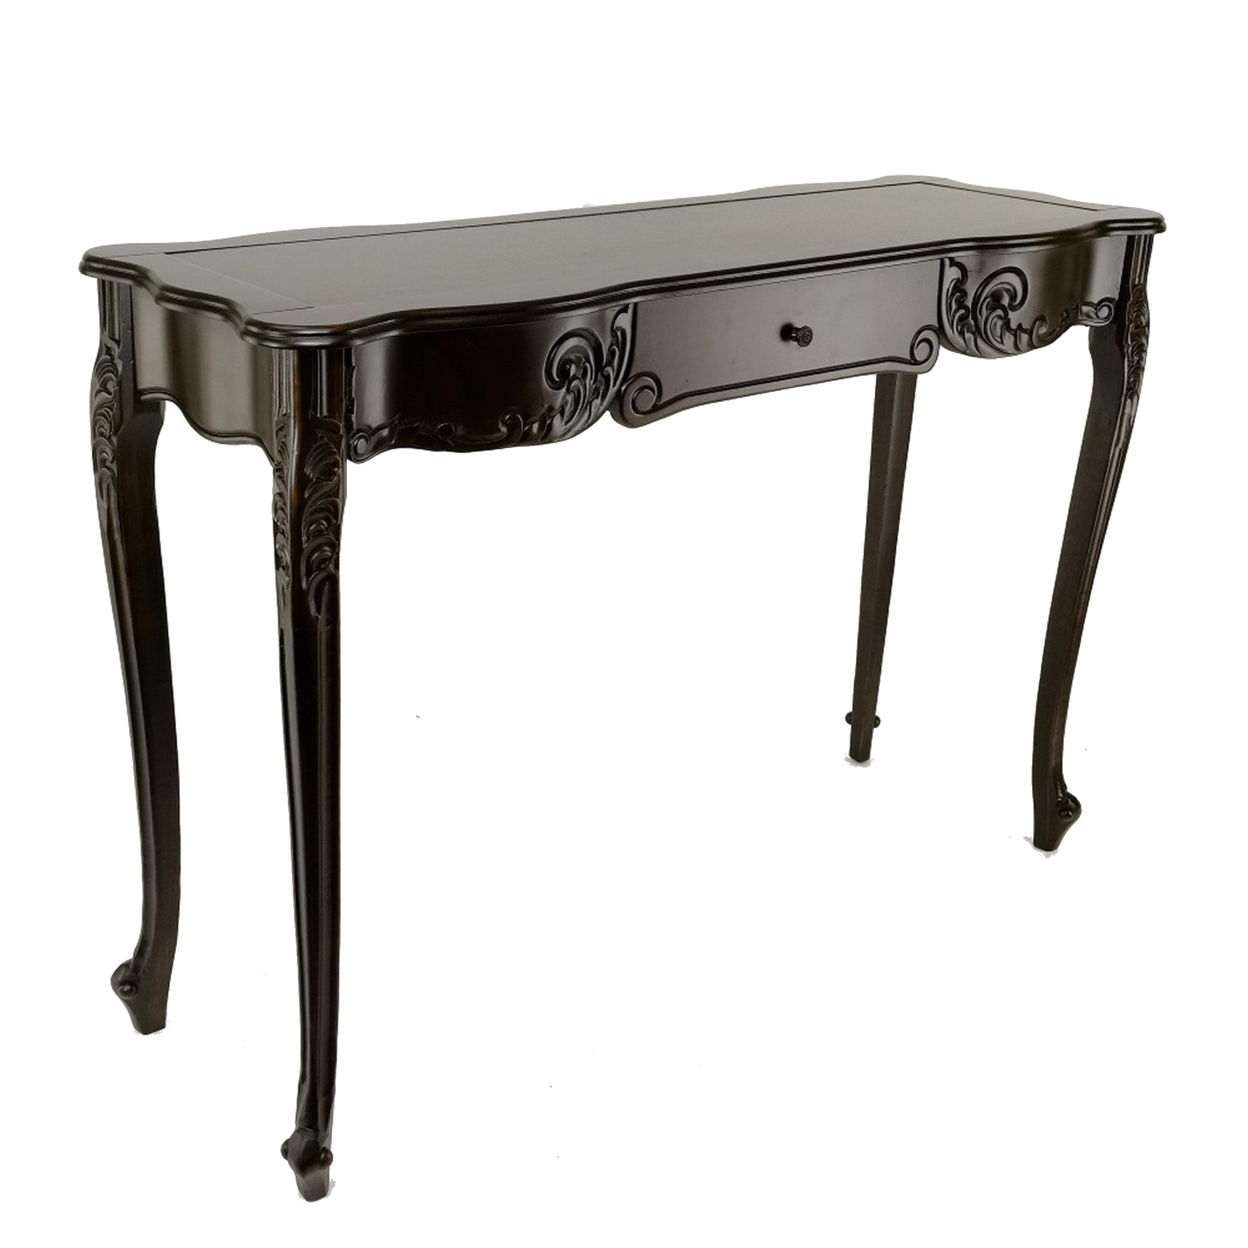 Troy 32 Inch Classic Wood Console Table, 1 Drawer, Floral Cared, Brown- Saltoro Sherpi- Saltoro Sherpi